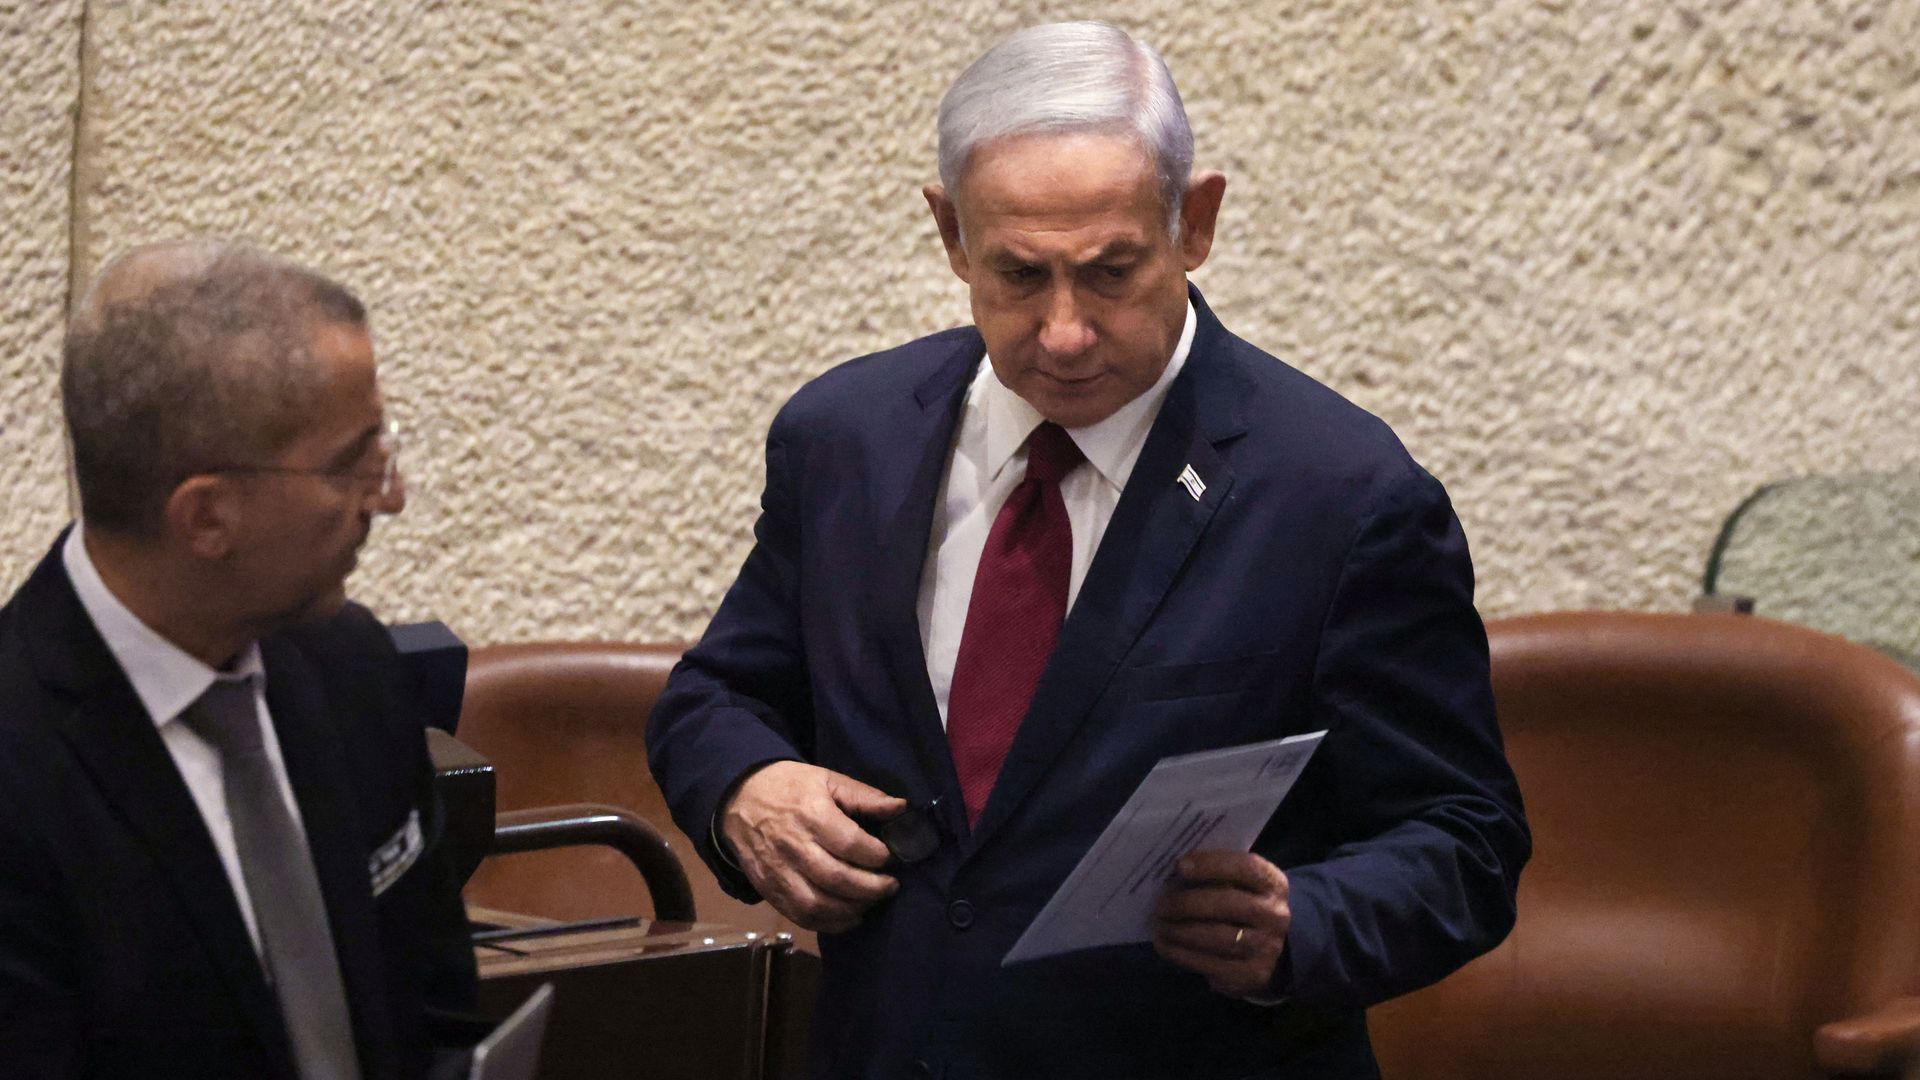 Israeli Prime Minister Benjamin Netanyahu standing next to a lawmaker in the Knesset